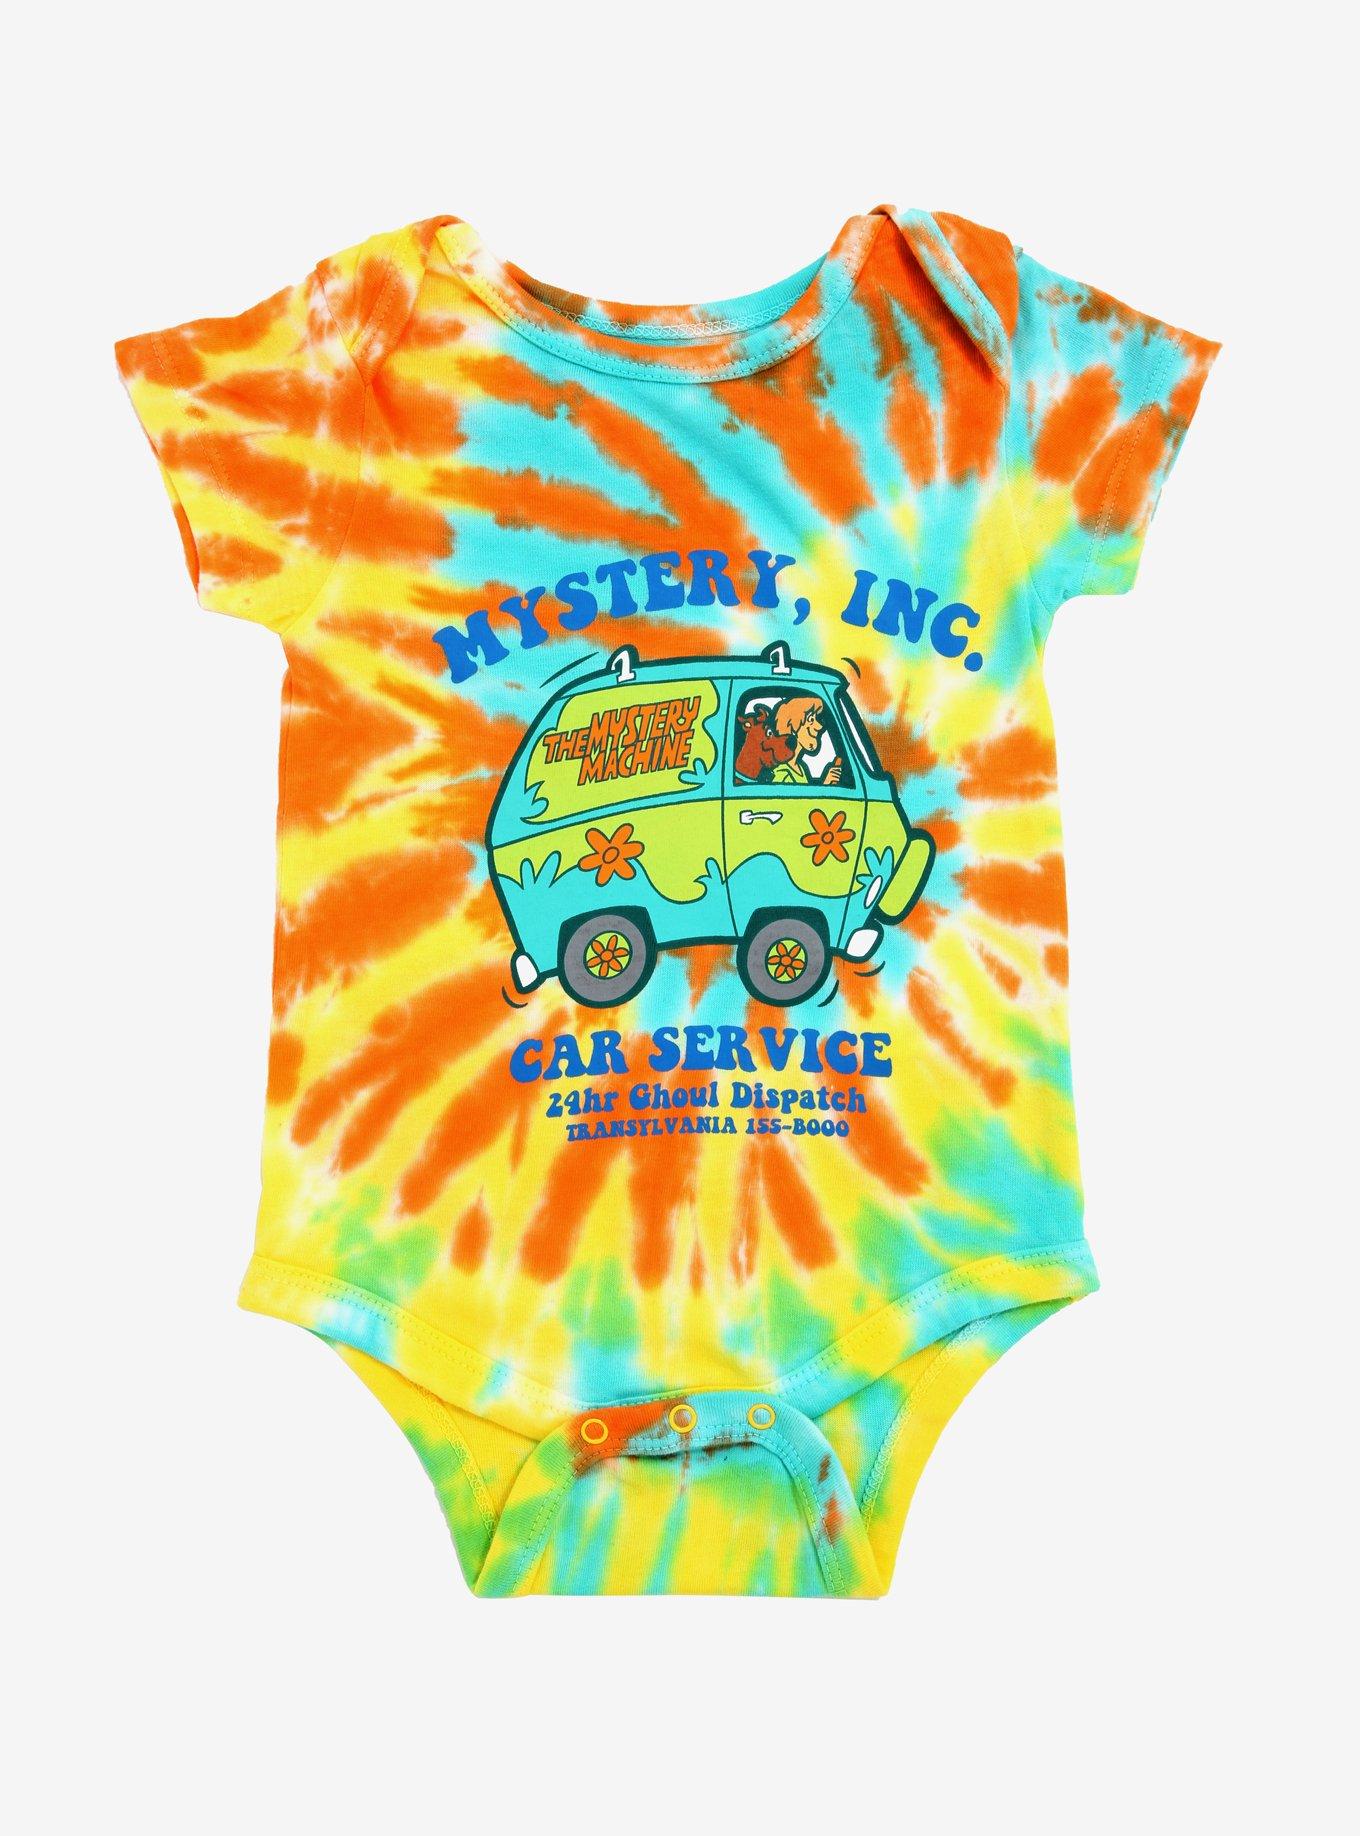 Scooby-Doo Super Soft Cotton Baby Onesies Comfy Short Sleeve Bodysuit The Clash